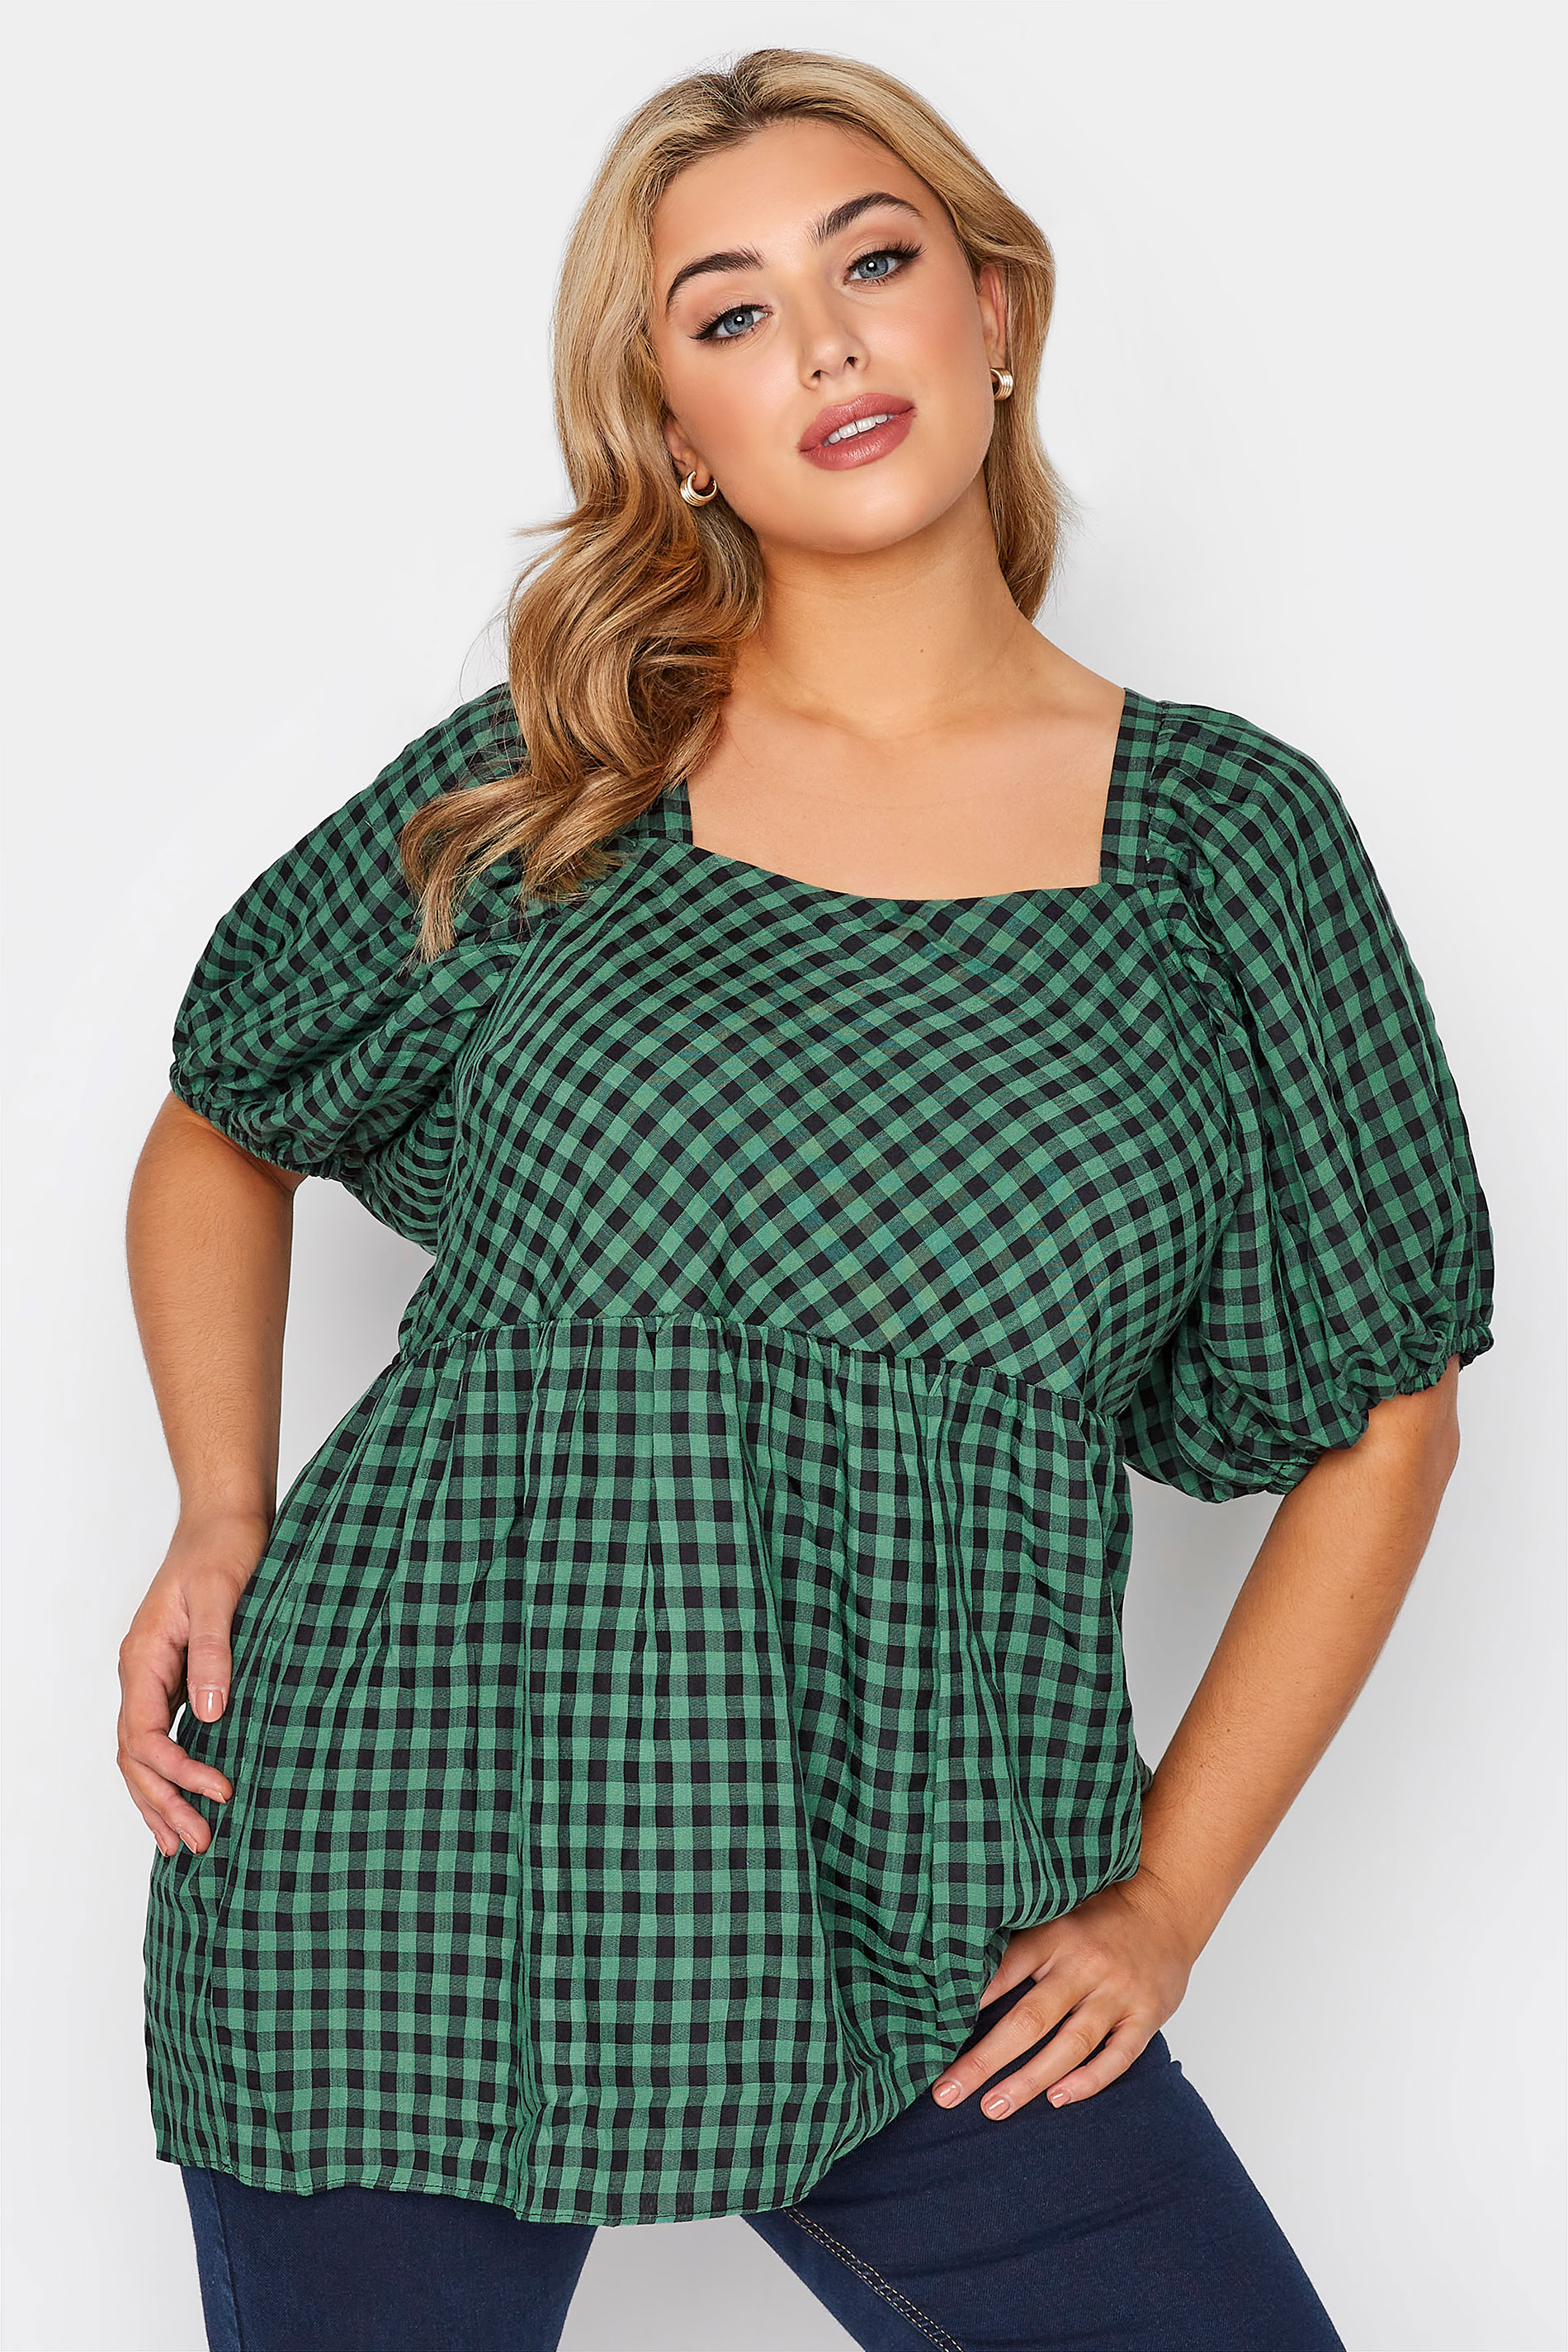 LIMITED COLLECTION Curve Green Gingham Milkmaid Peplum Top 1